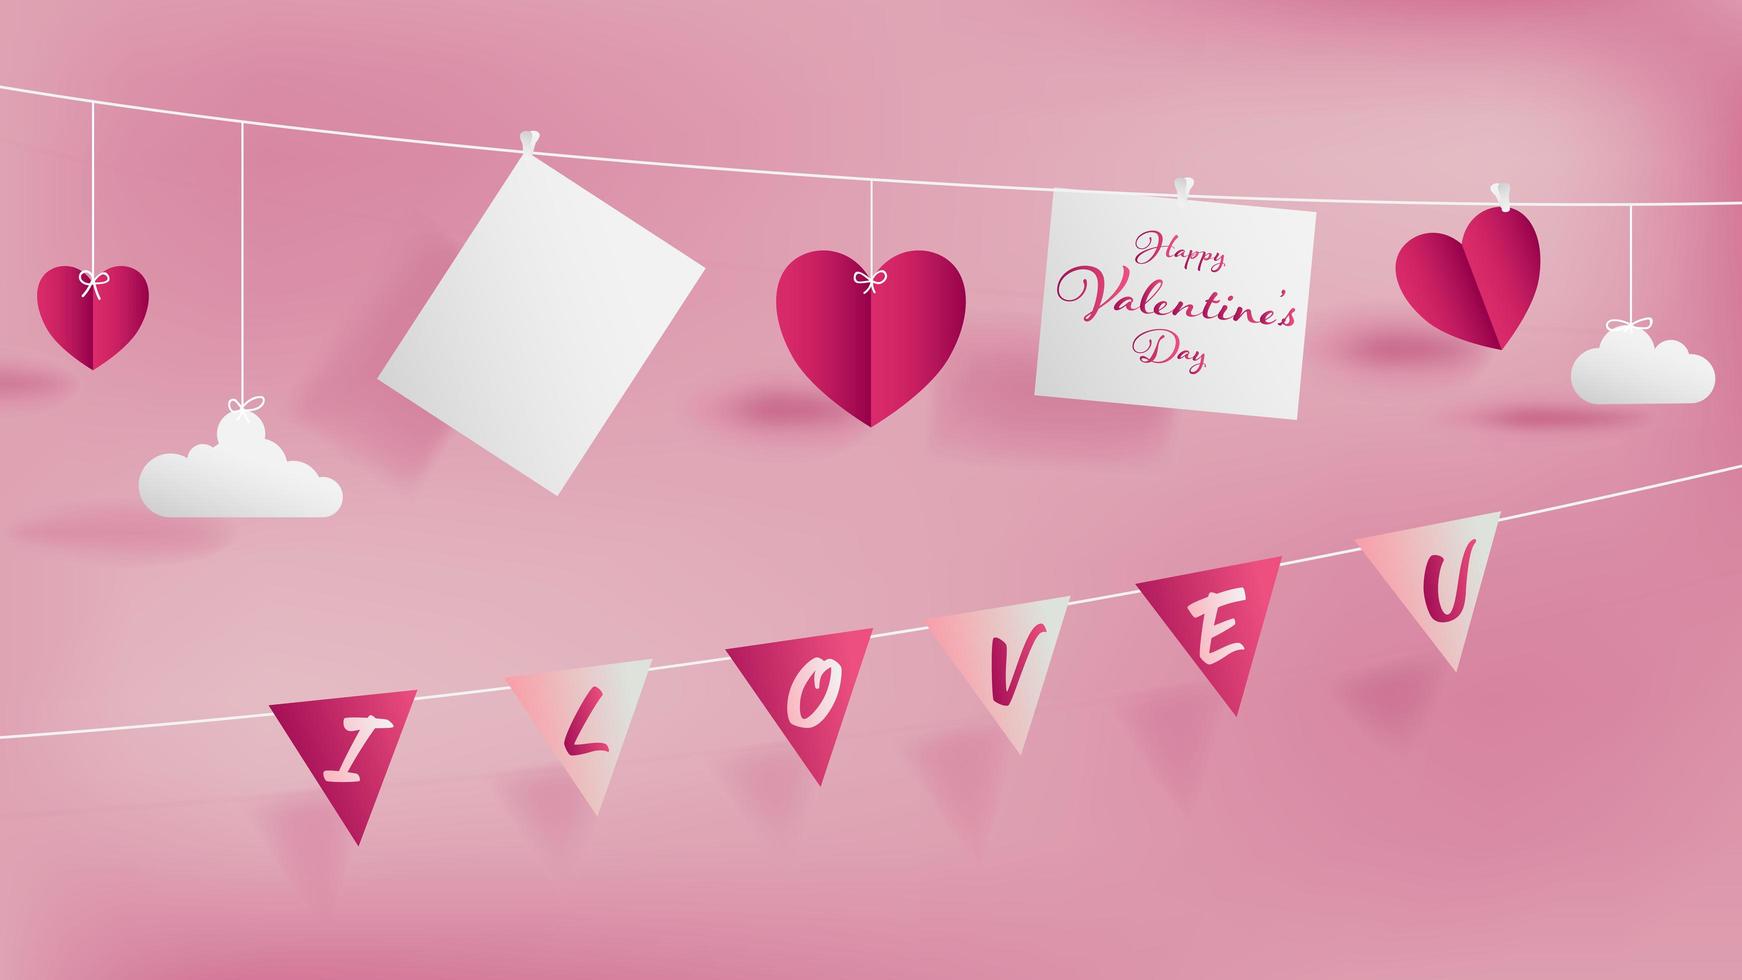 Valentine 's day paper craft concept contain two white strings vector